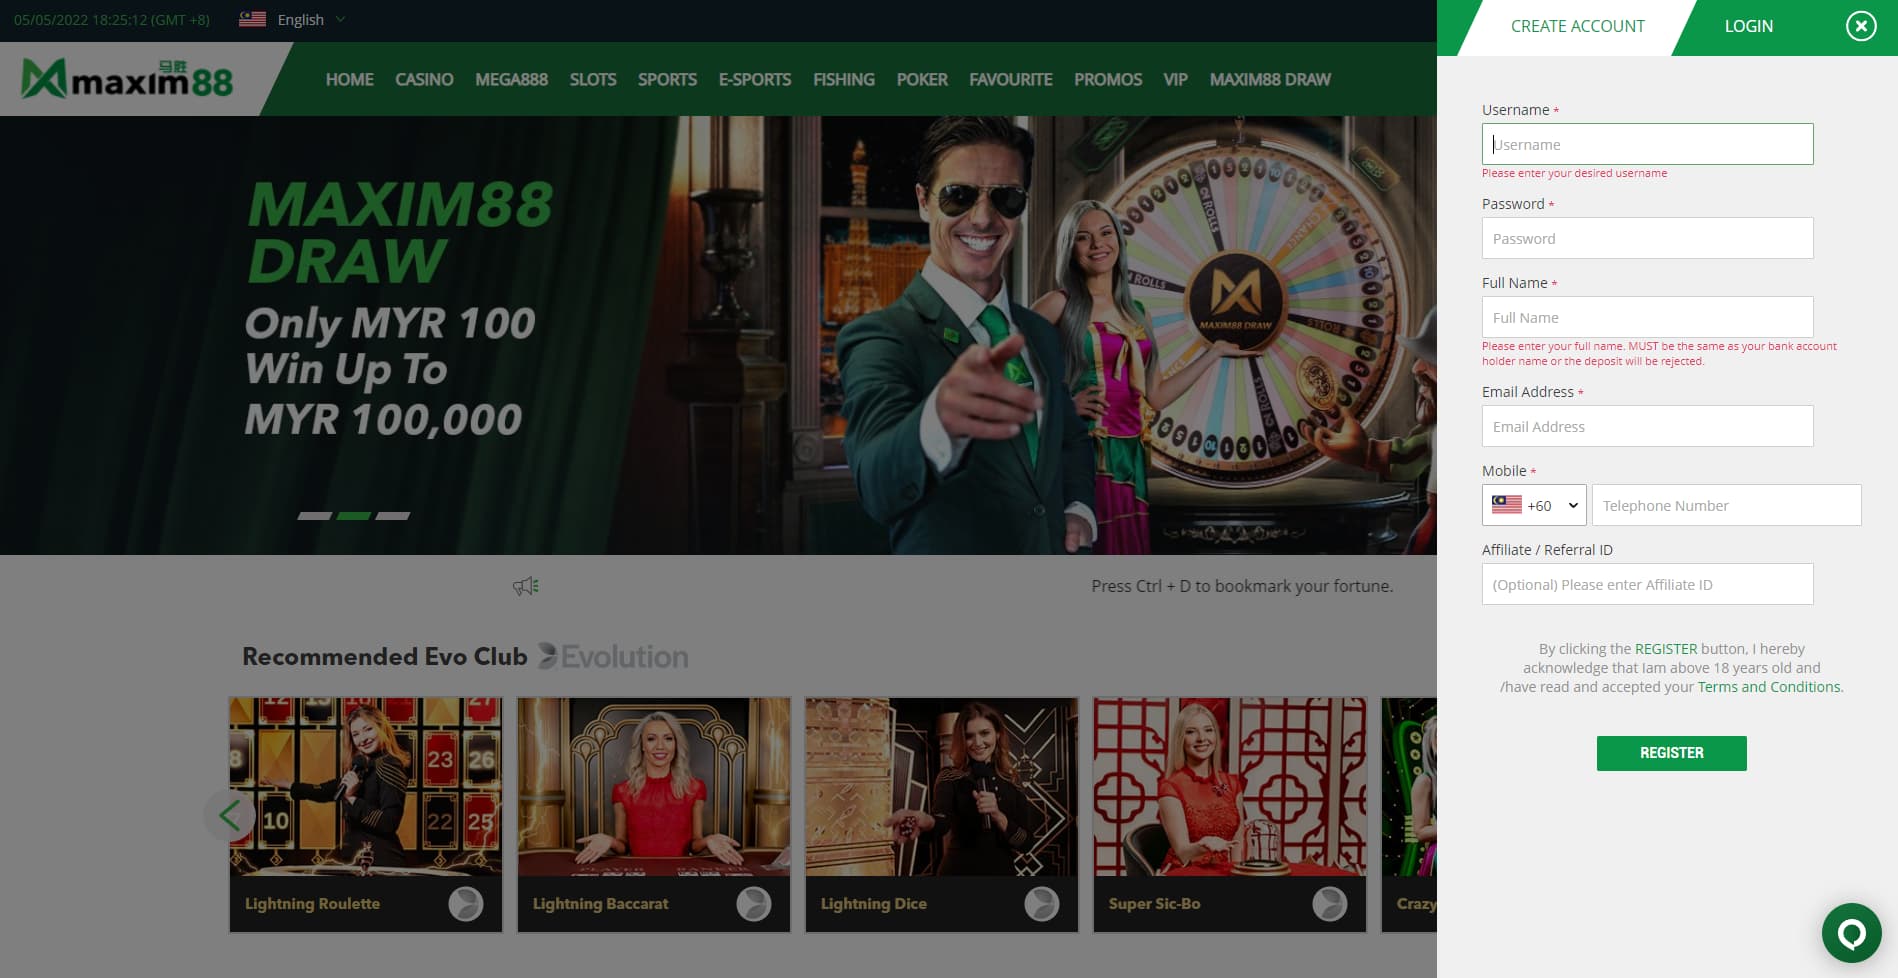 maxim88 sports betting site - registration page screen